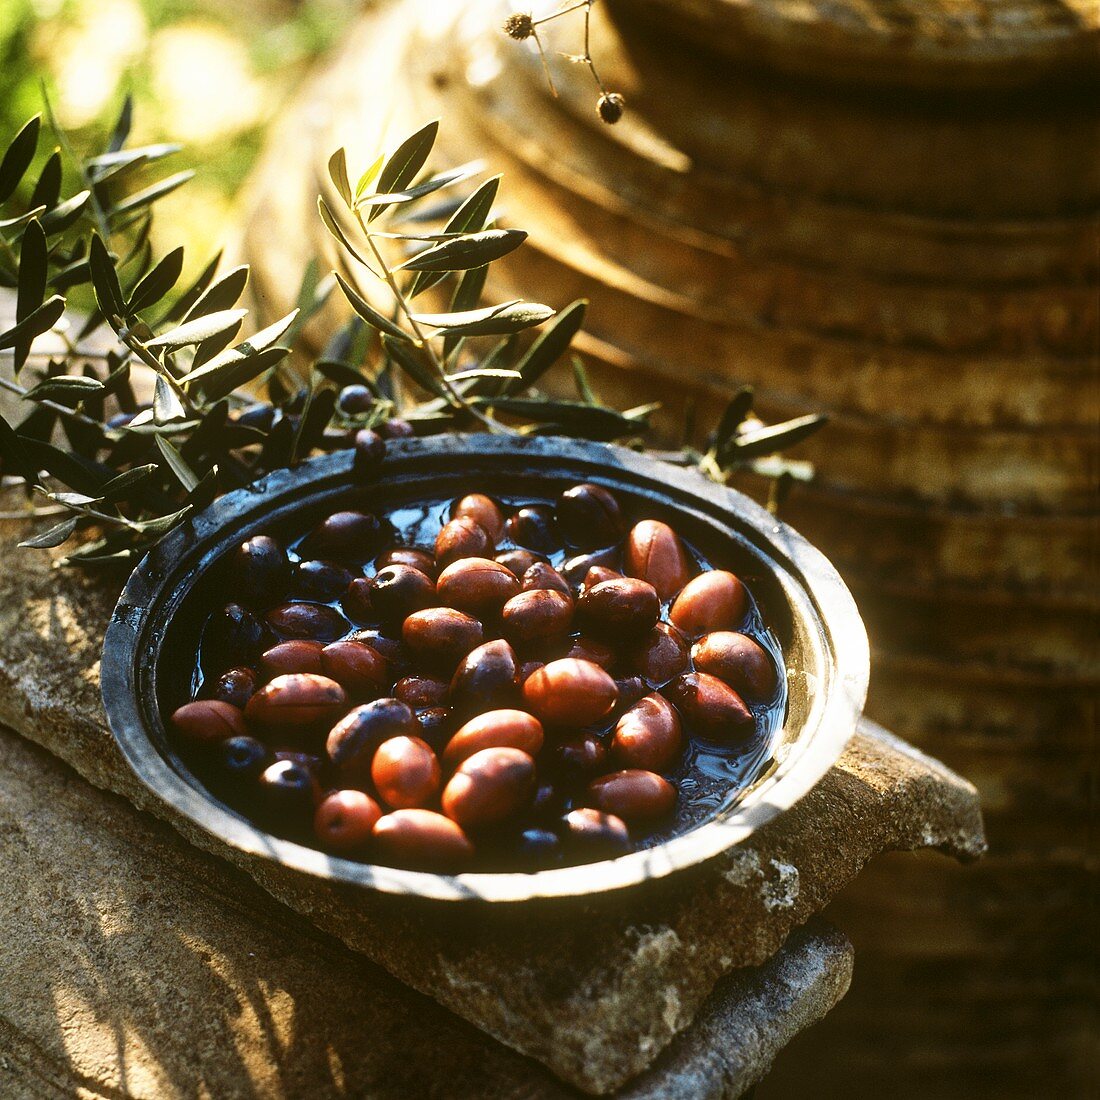 Fresh Olives in a Tray with Branches